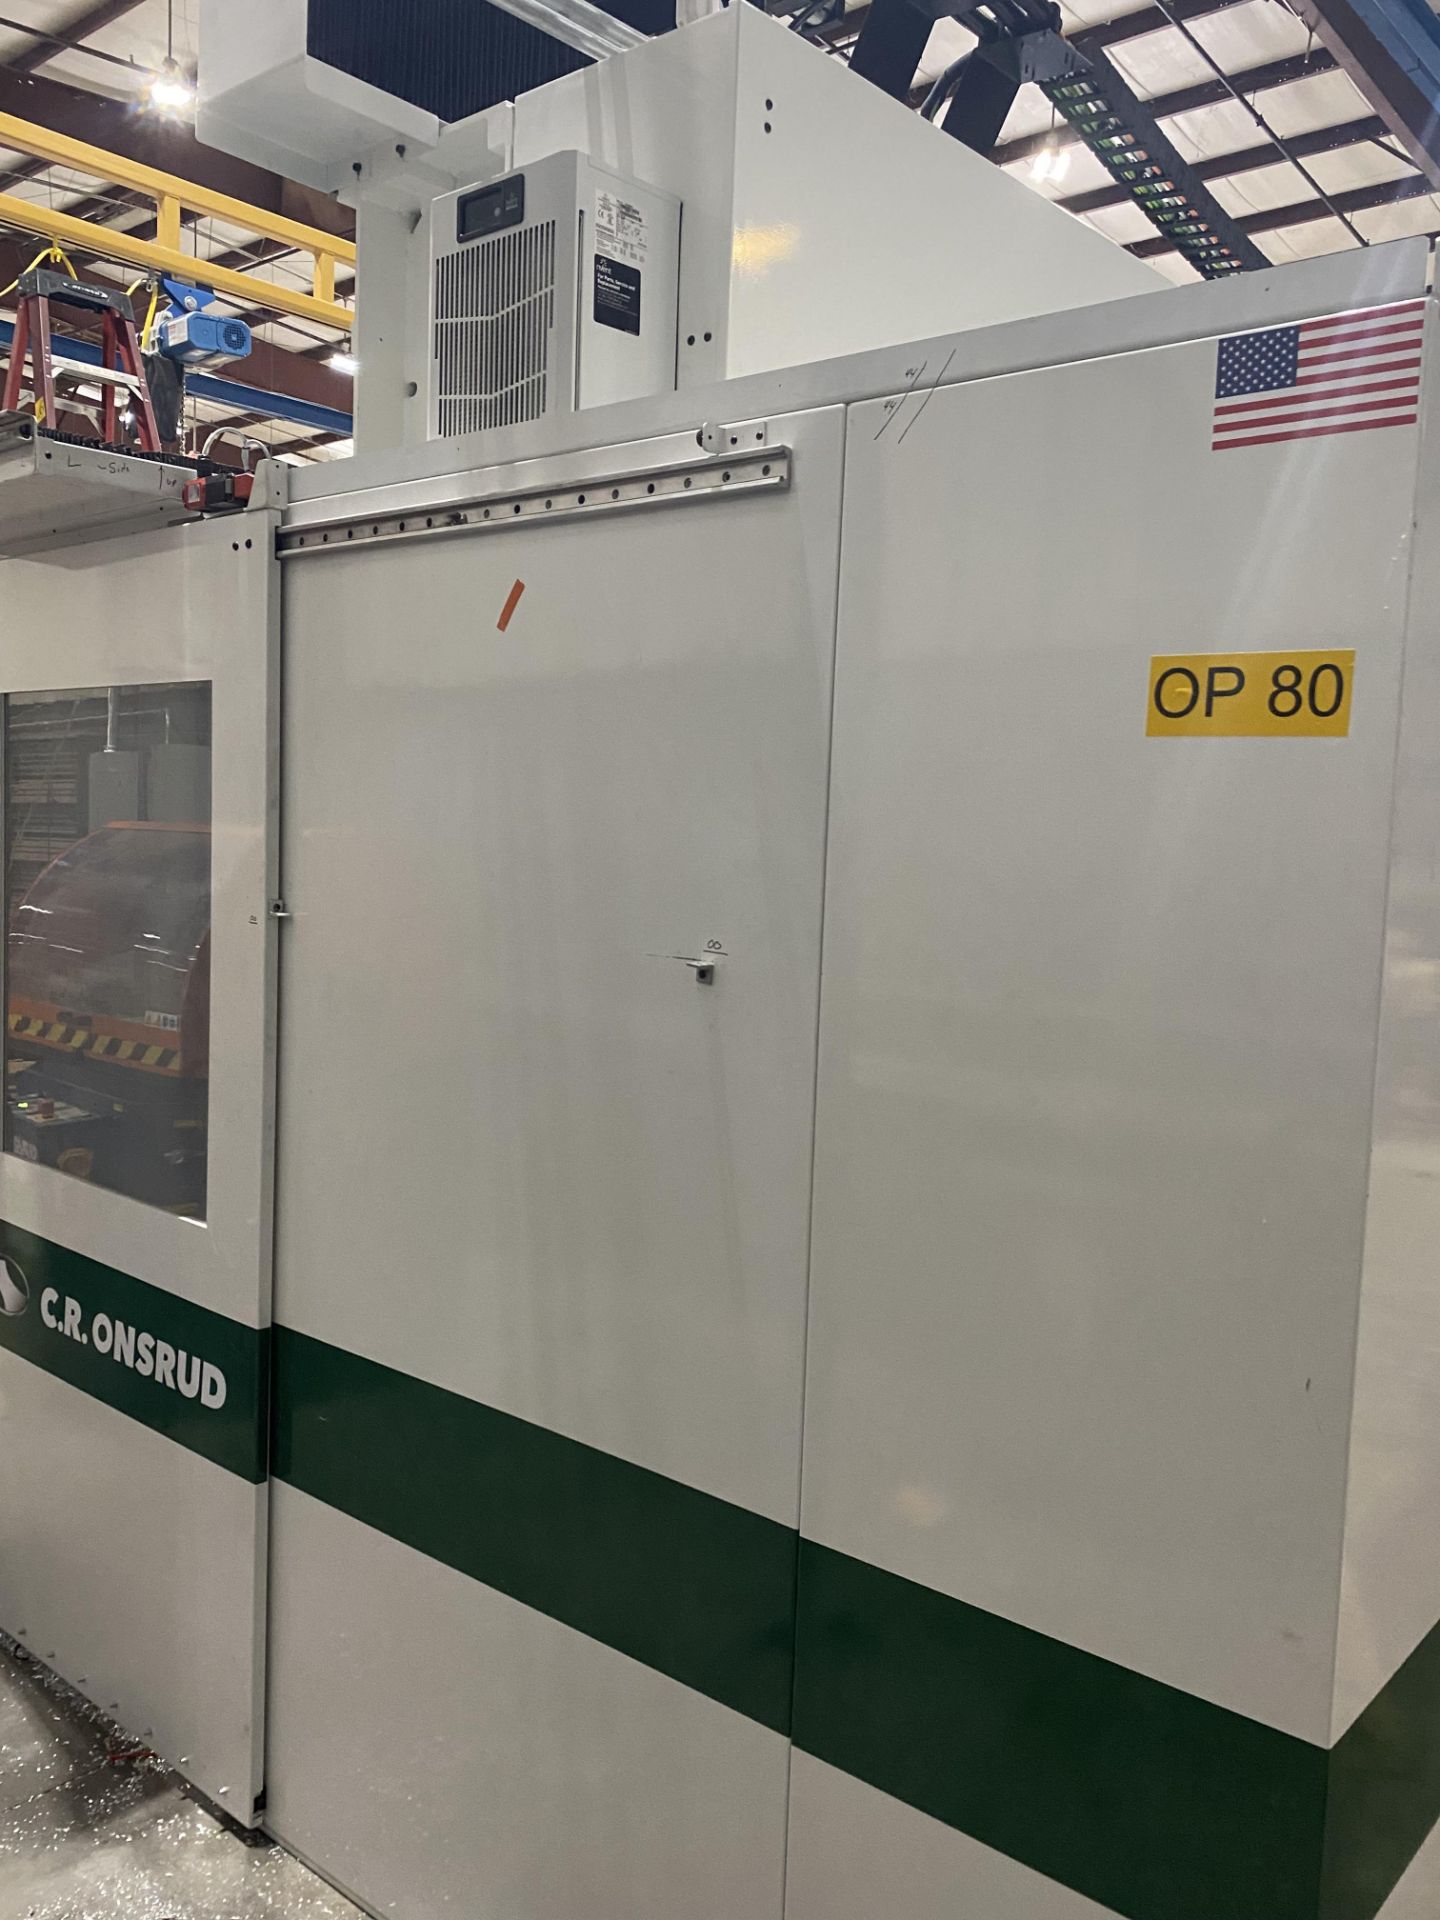 C.R ONSRUD MODEL 122E24W6 "Extreme Series" CNC ROUTER, new 2023, 6 x 10 table - Image 10 of 13